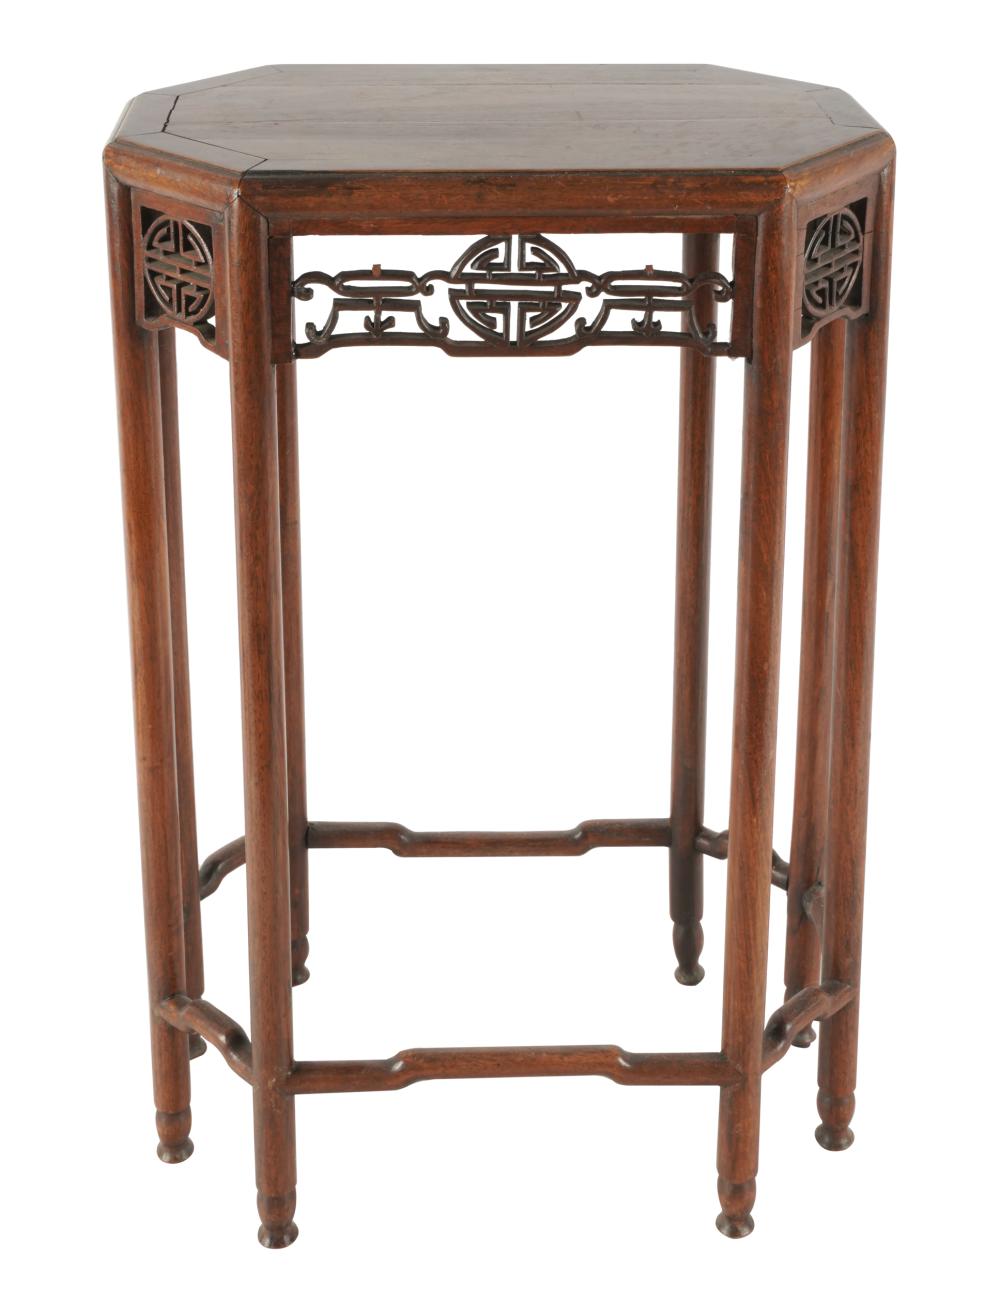 CHINESE HARDWOOD END TABLEwith openwork